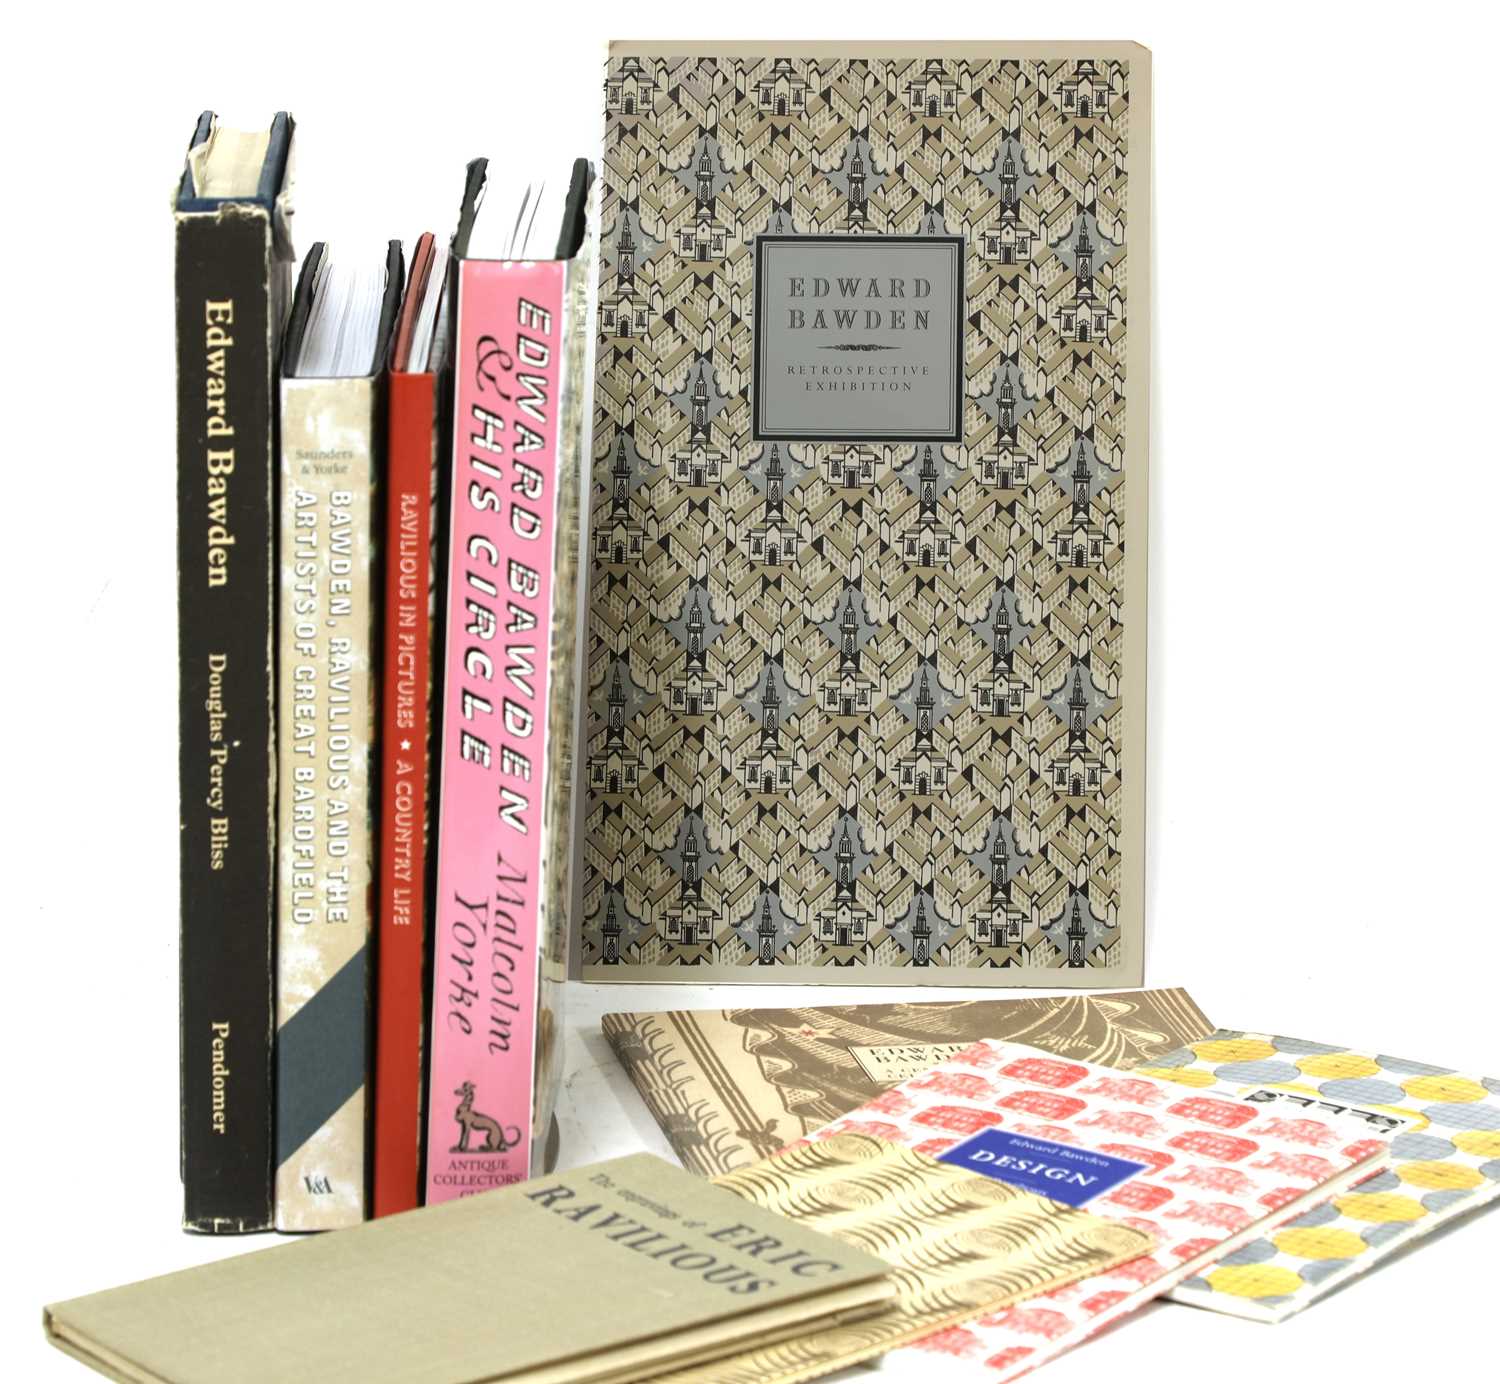 Lot 17 - Ten books and pamphlets on Edward Bawden and Eric Ravilious